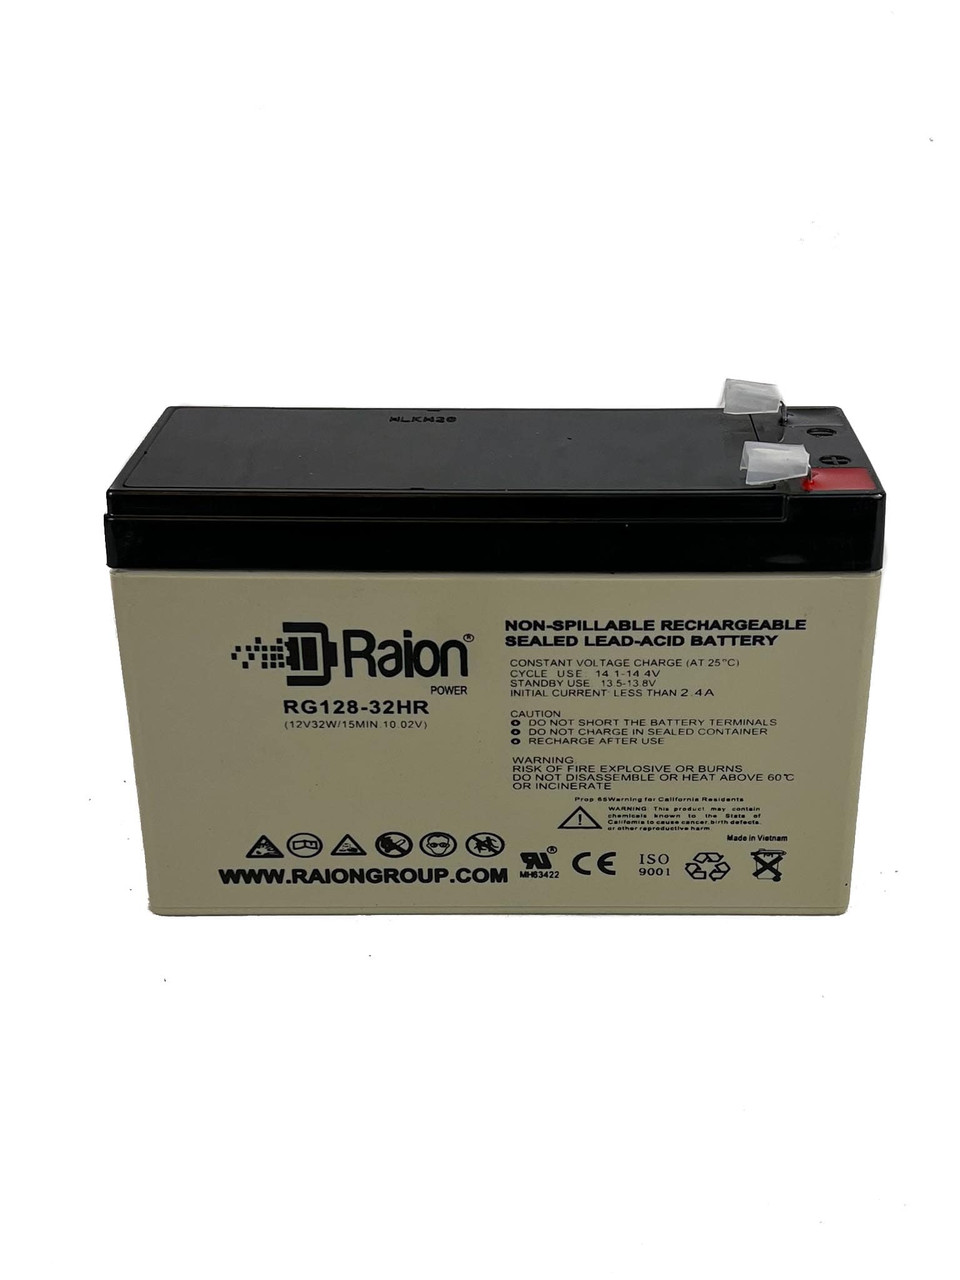 Raion Power RG128-32HR Replacement High Rate Battery Cartridge for NorthStar NSB 75 Broadband